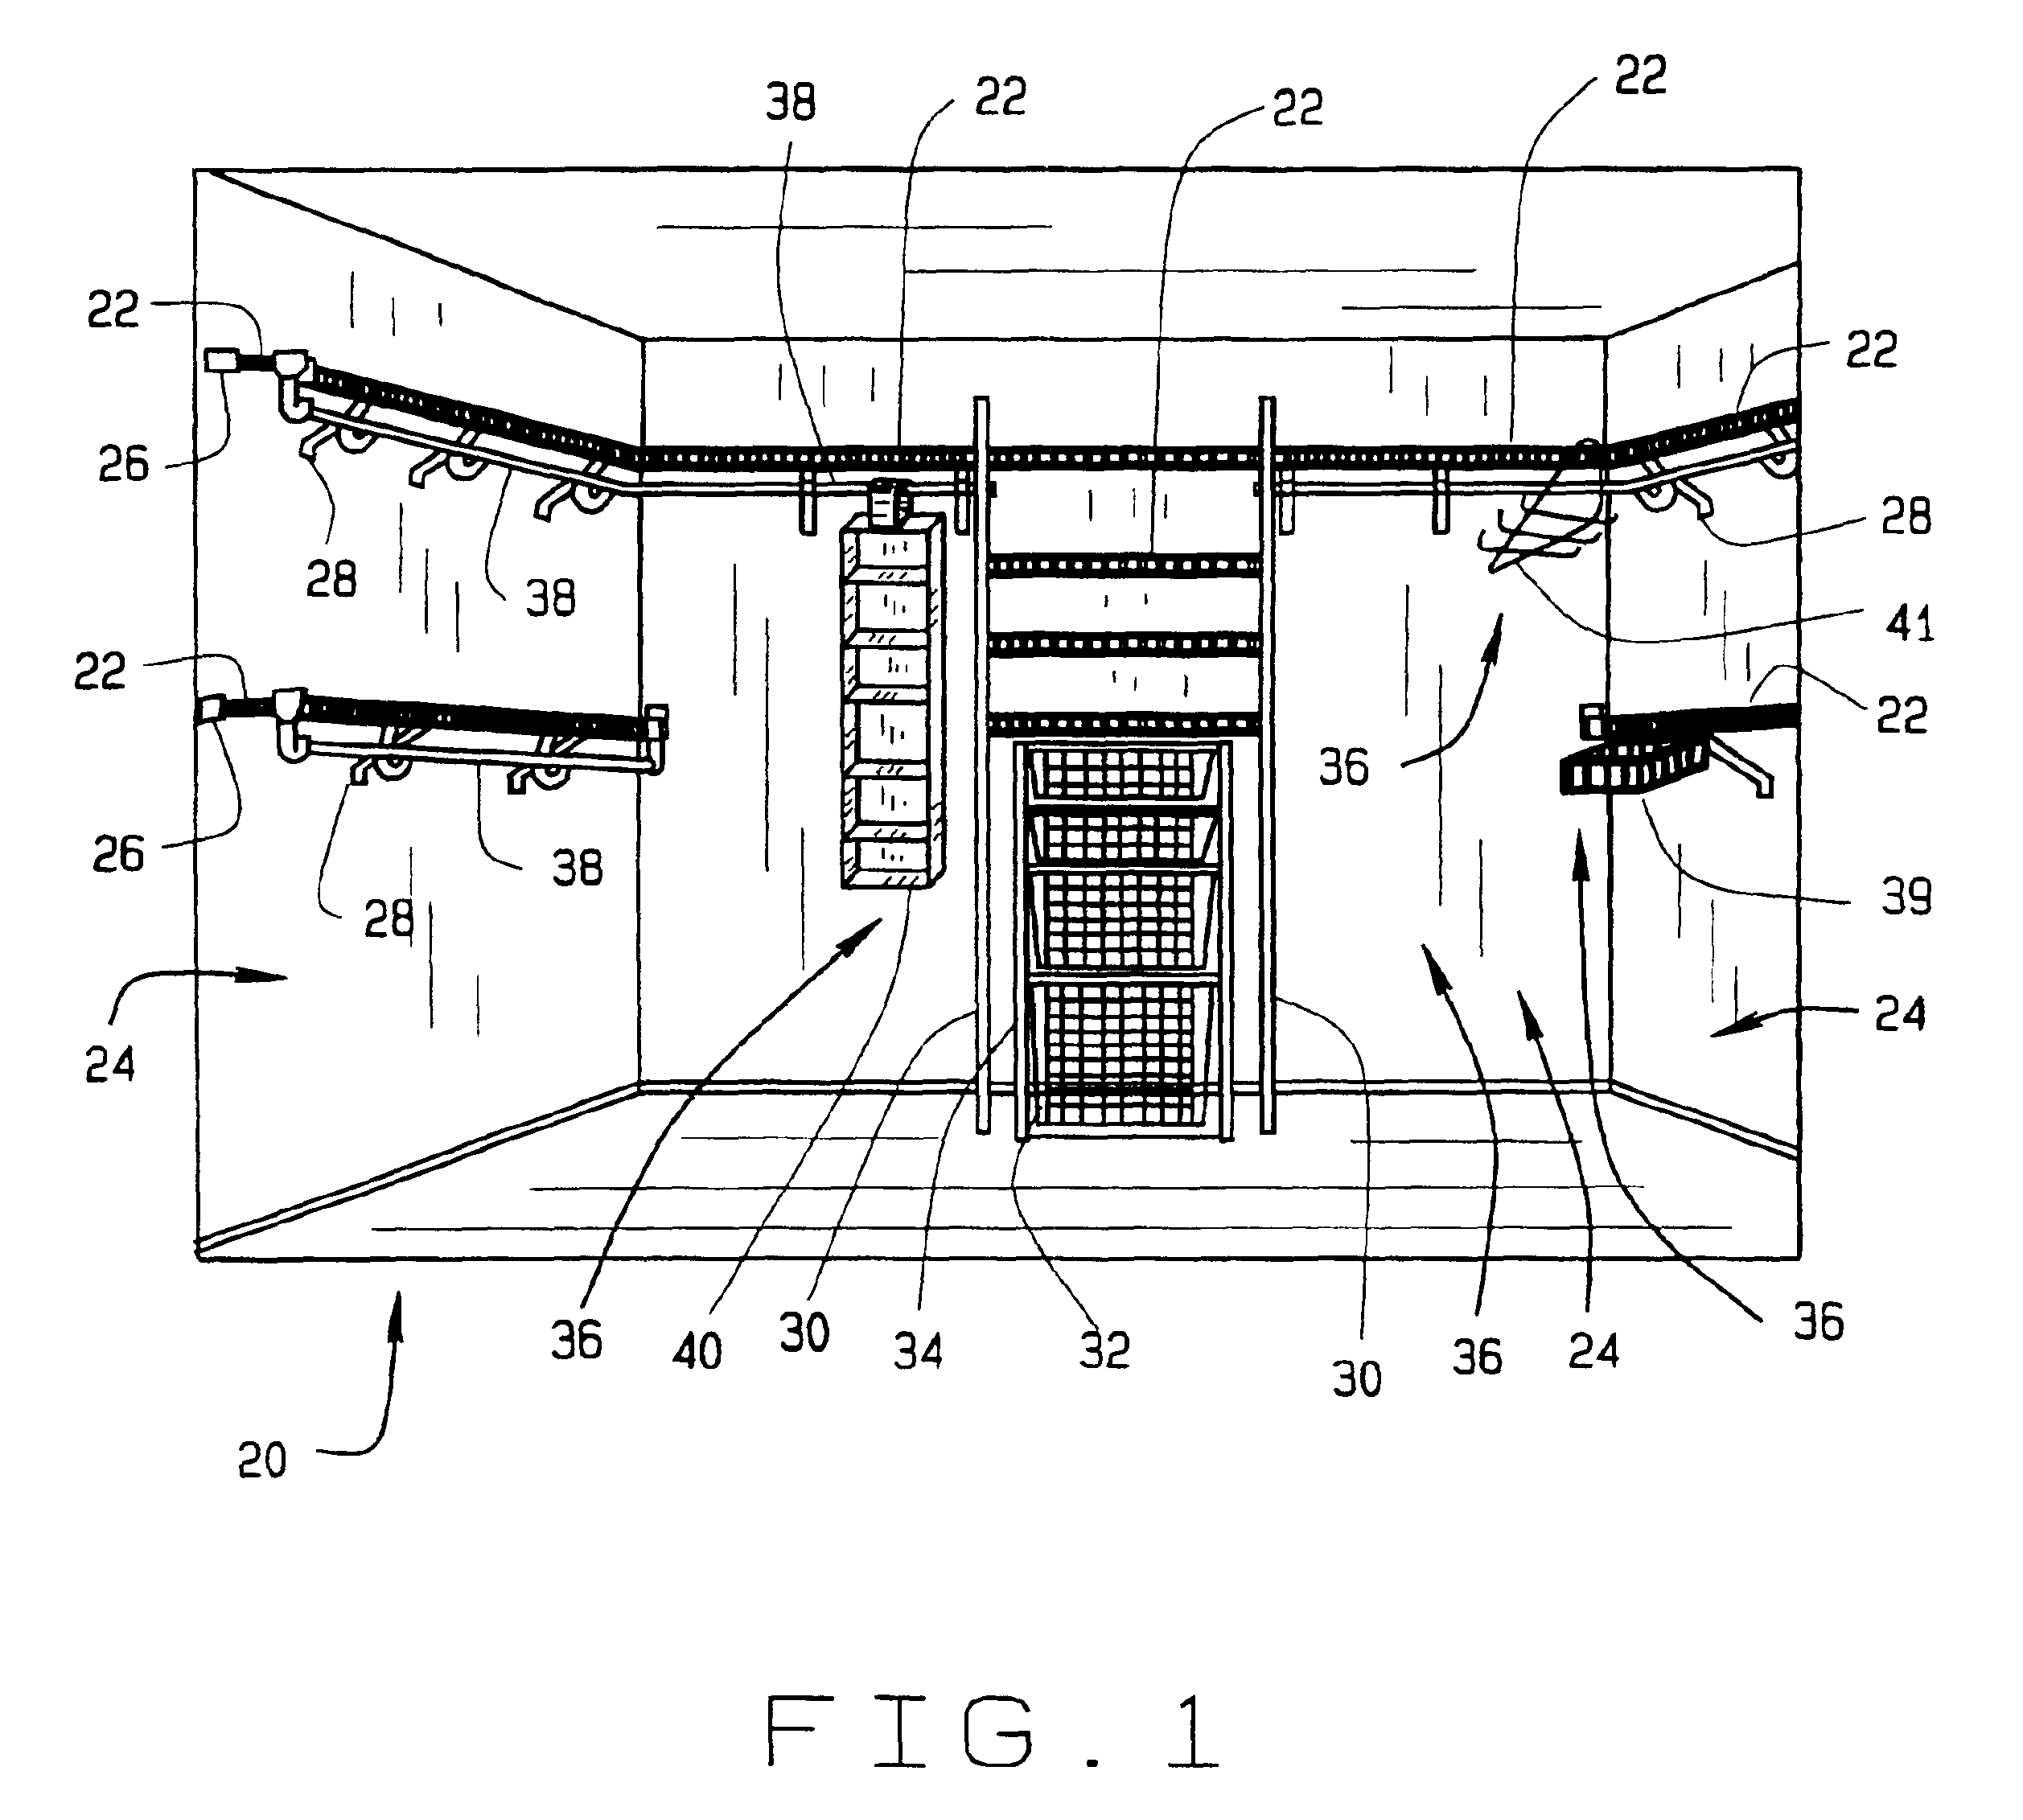 Attachment device for shelving and organizer systems